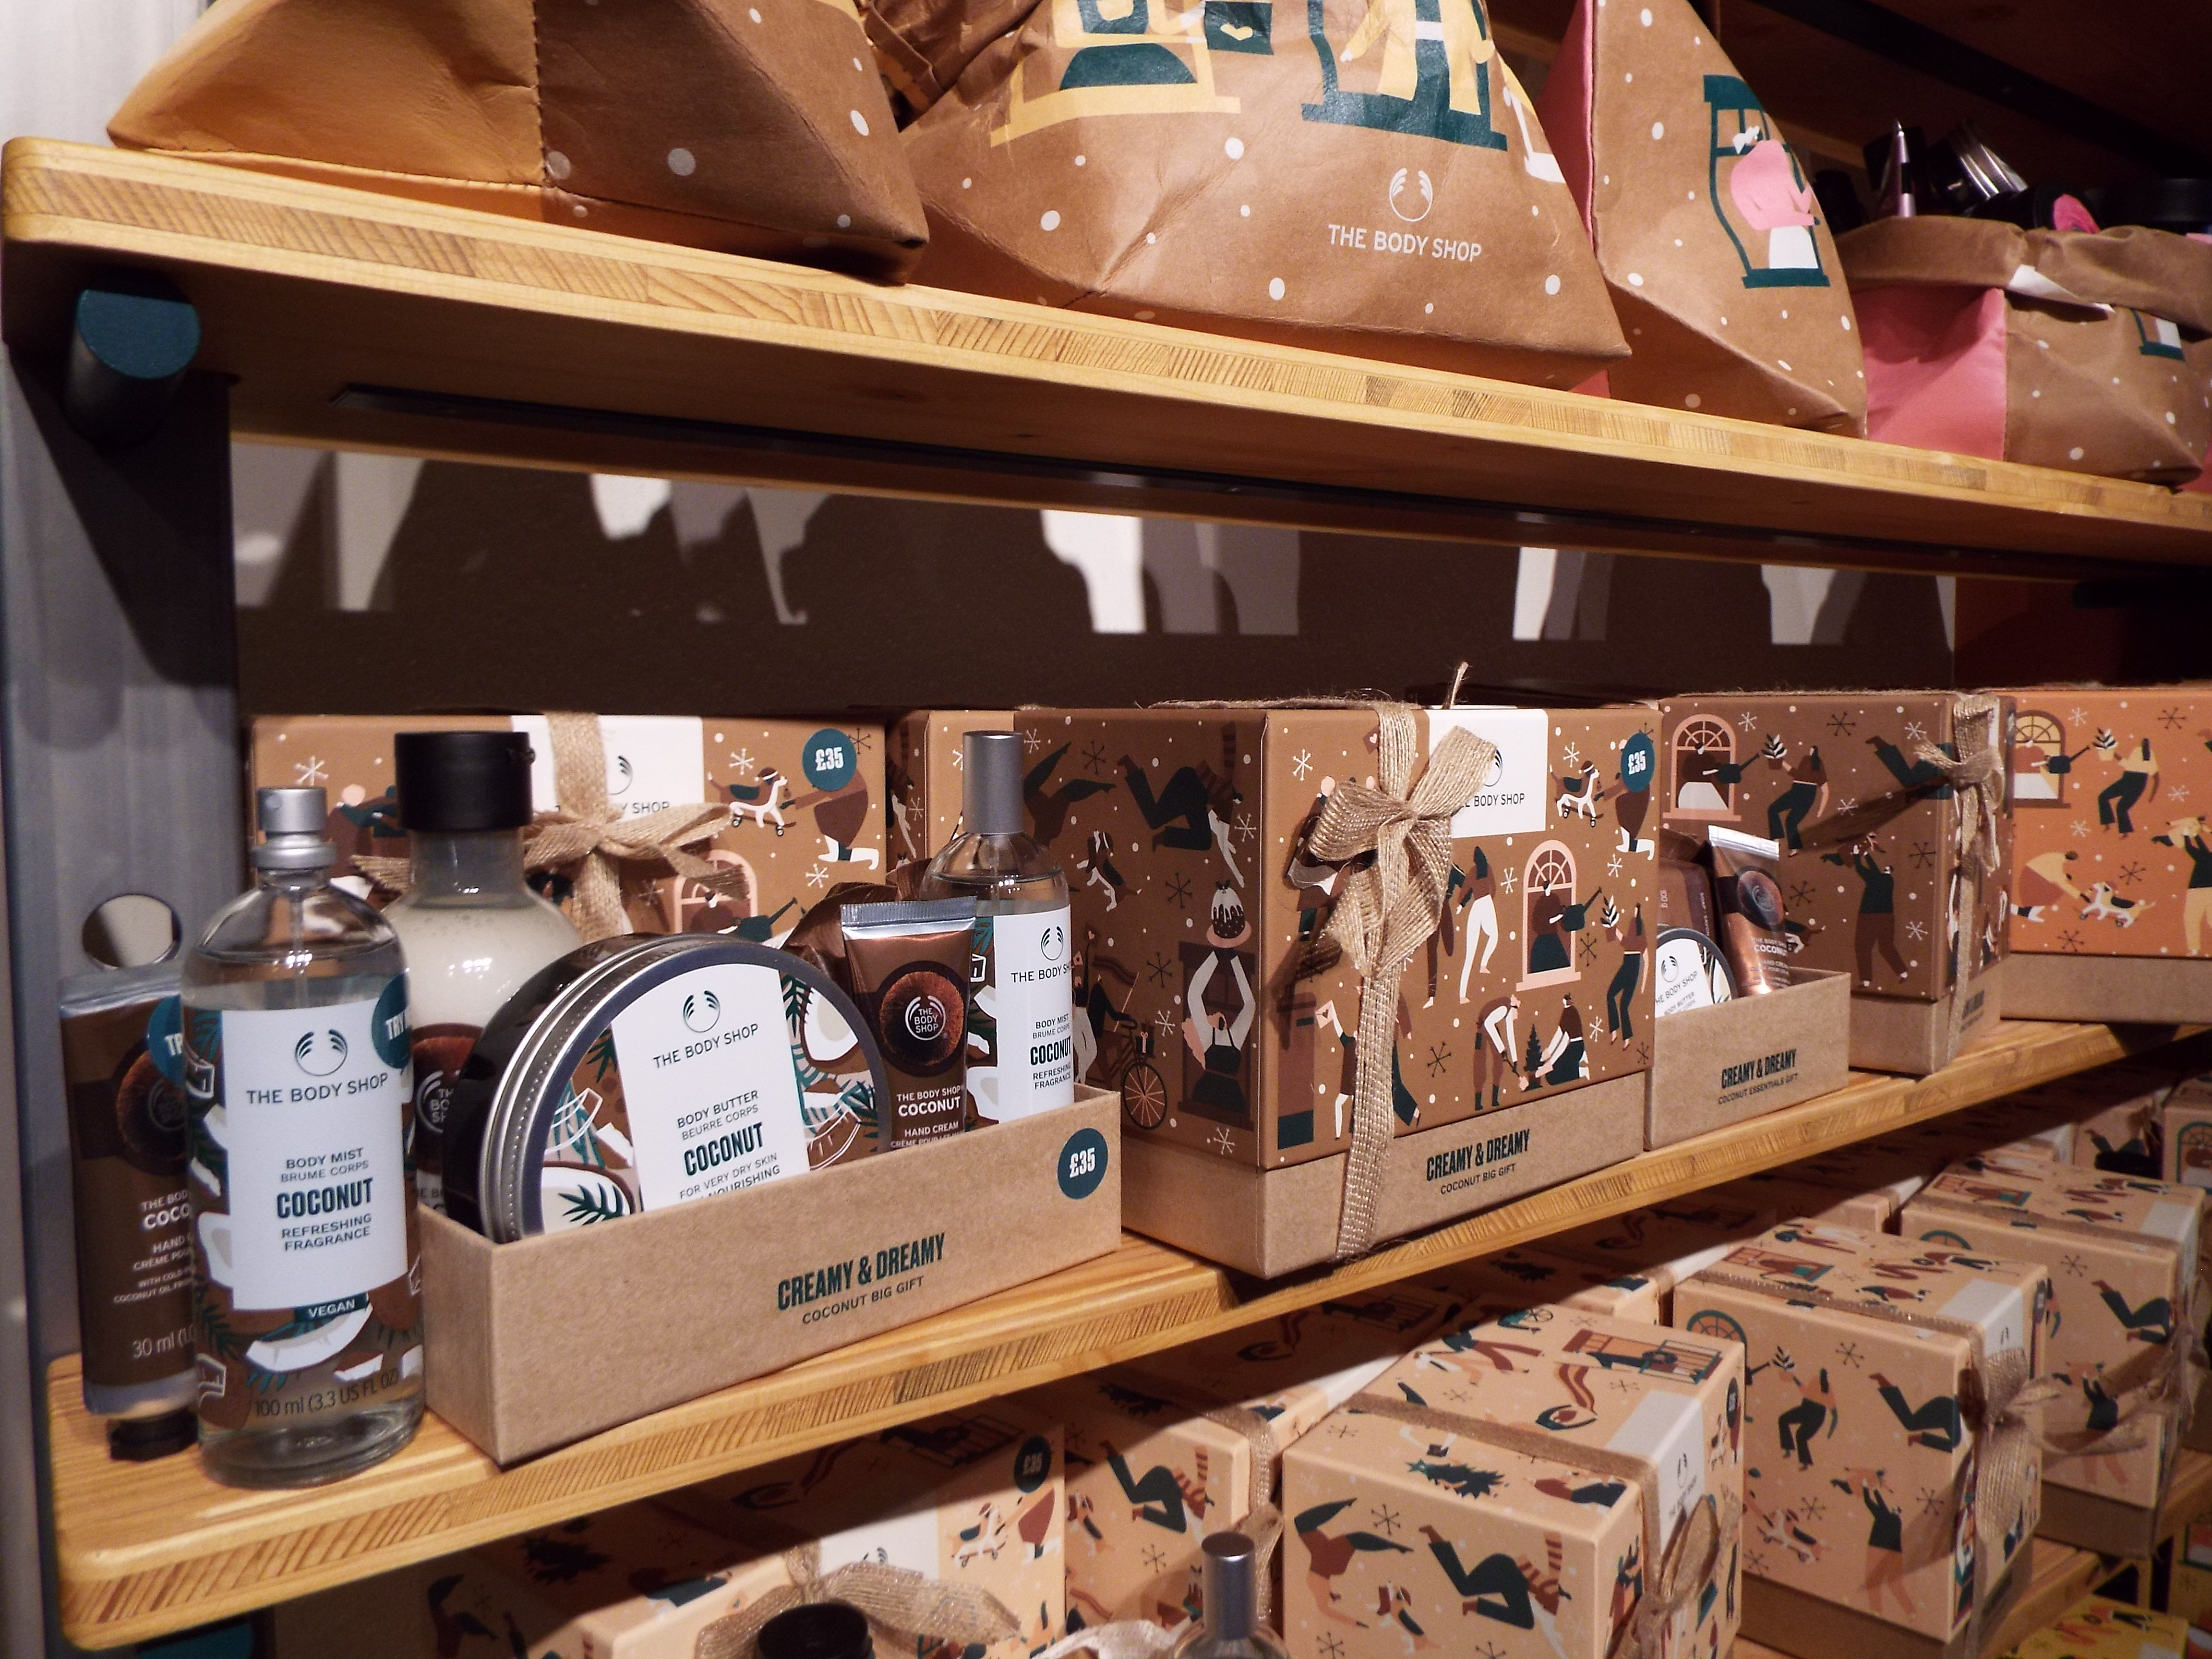 A selection of the coconut collection, dressed in brown paper and cardboard packing on the shelves.